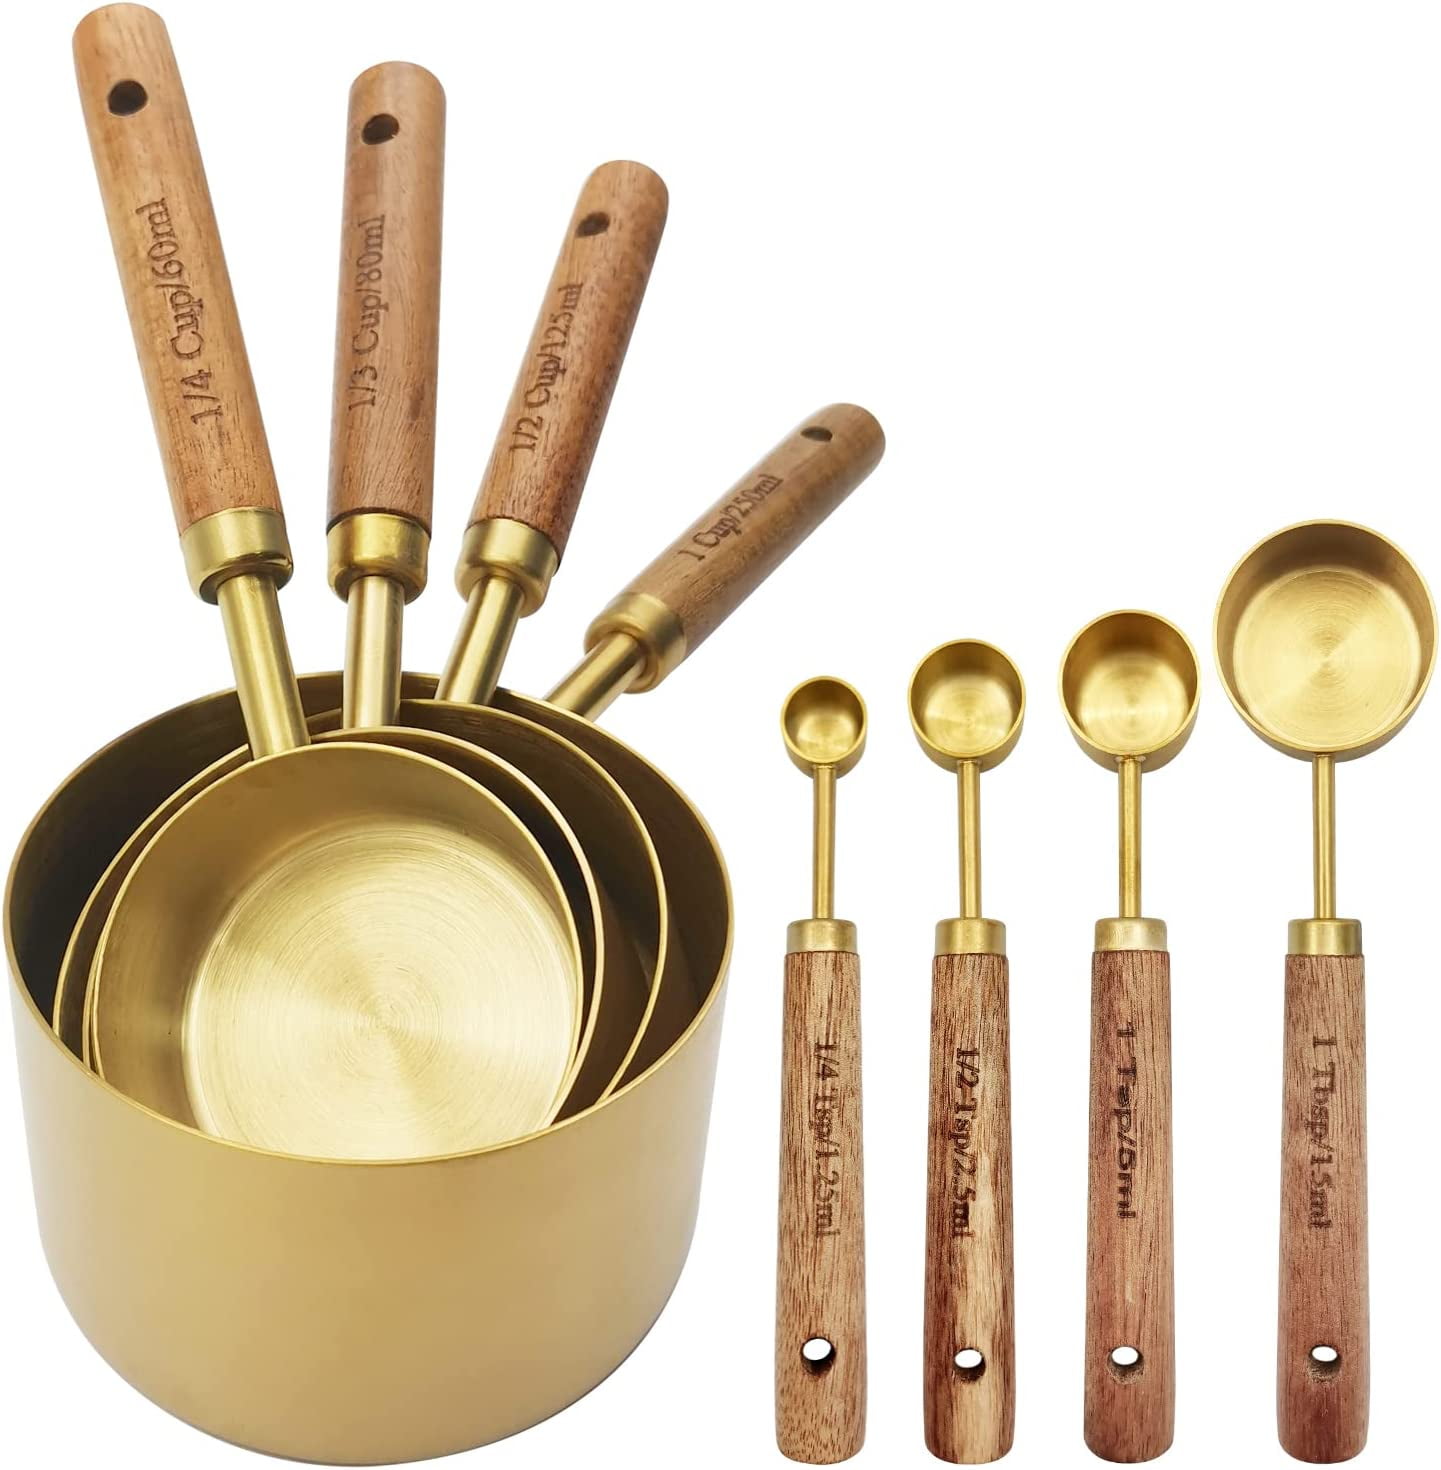  Muchtolove Measuring Cups and Spoons Set of 8, Golden Stainless  Steel Measuring Cup with Wooden Handle, Kitchen/Food/Liquid/Baking: Home &  Kitchen